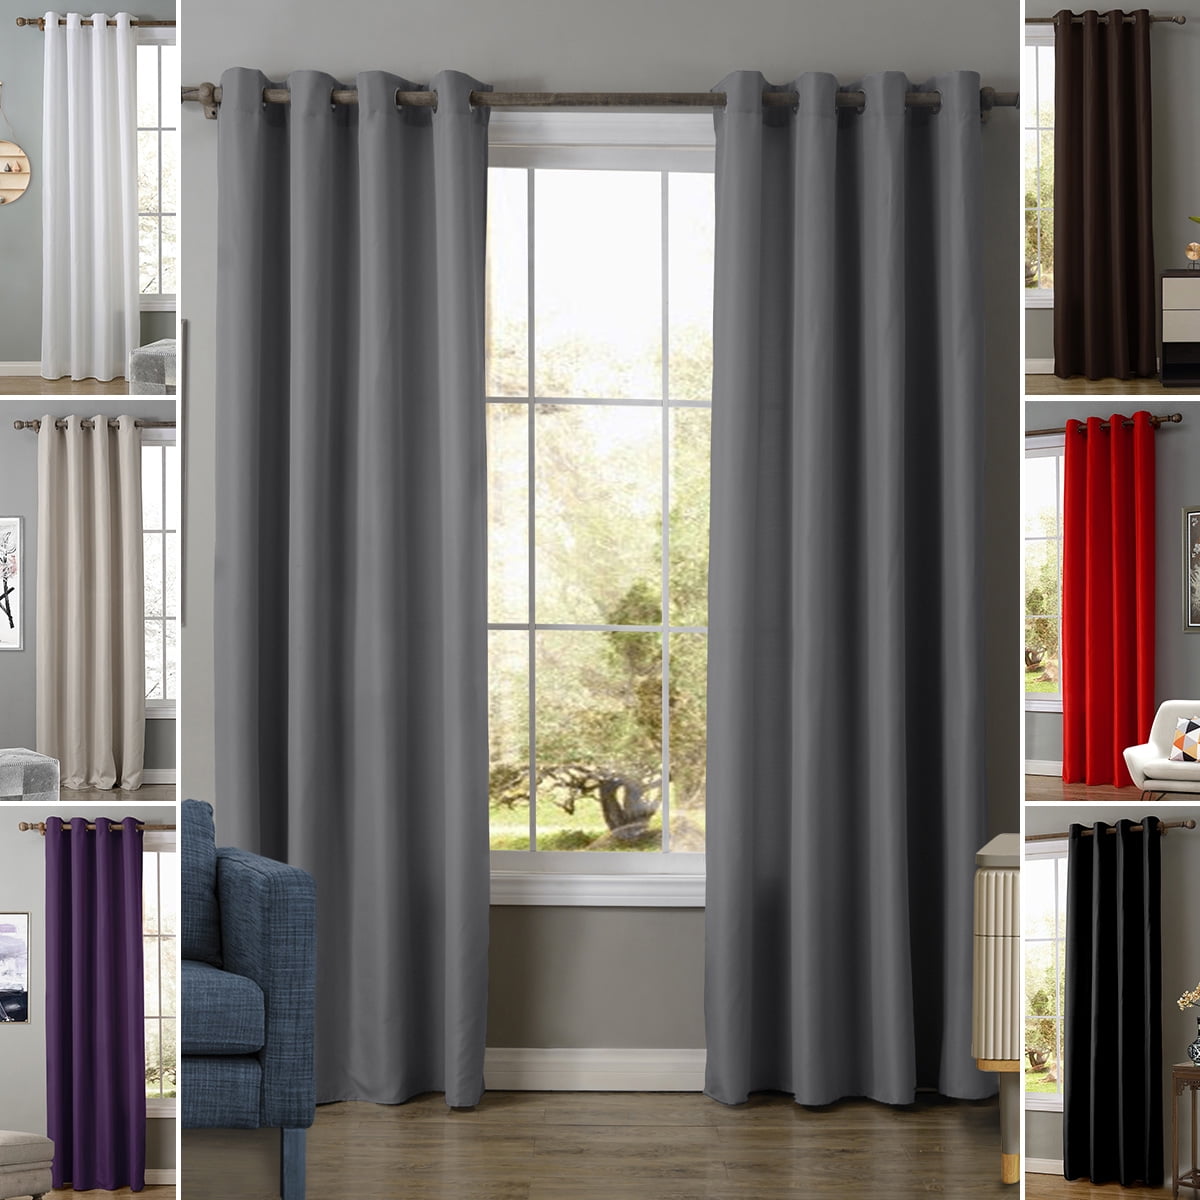 THERMAL TOP EYELET BLACKOUT WINDOW SHADE SHEER DRAPES CURTAIN HOME DECOR STRICT 